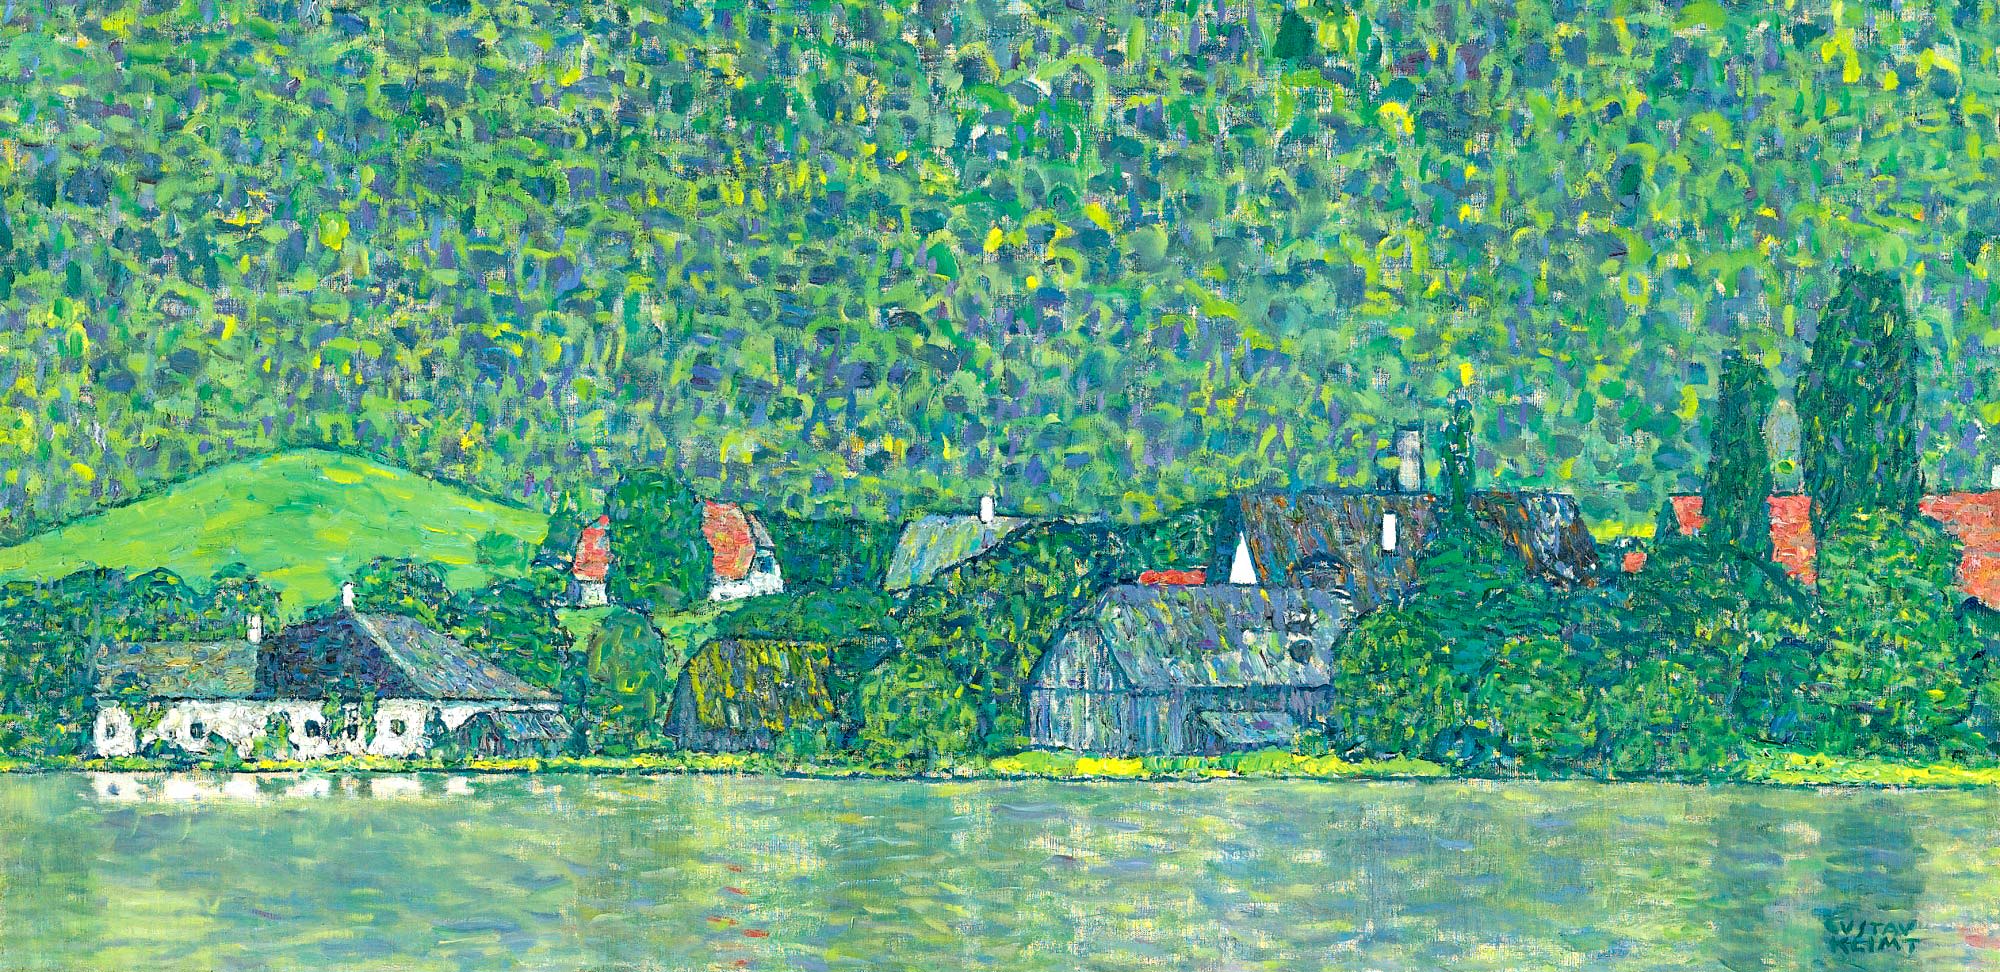 colourful painting showing buildings on a lake shore with forested hills behind